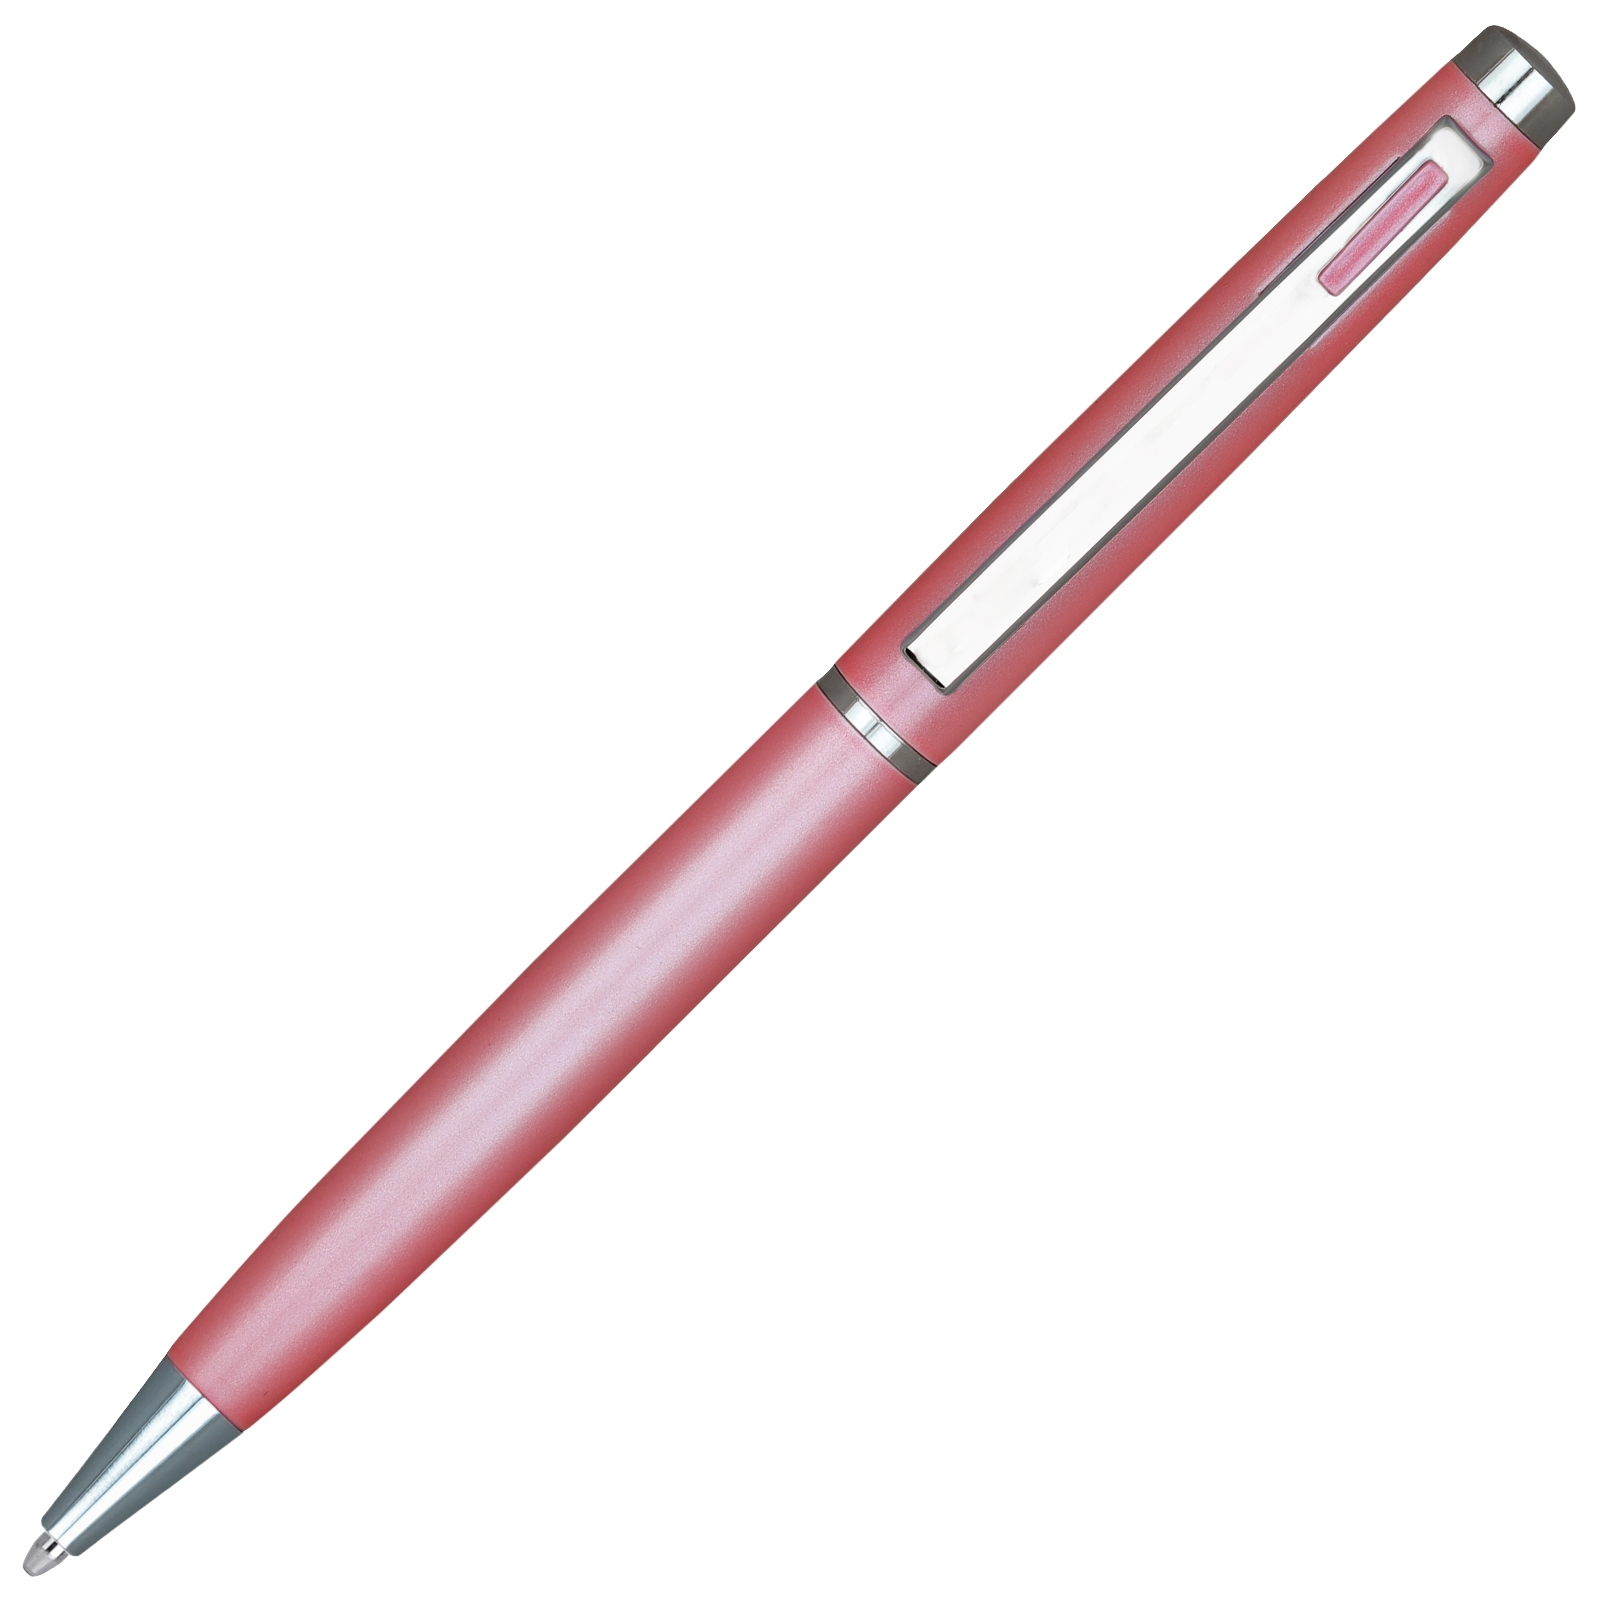 4G Ball Pen – Pink with Pink Accents